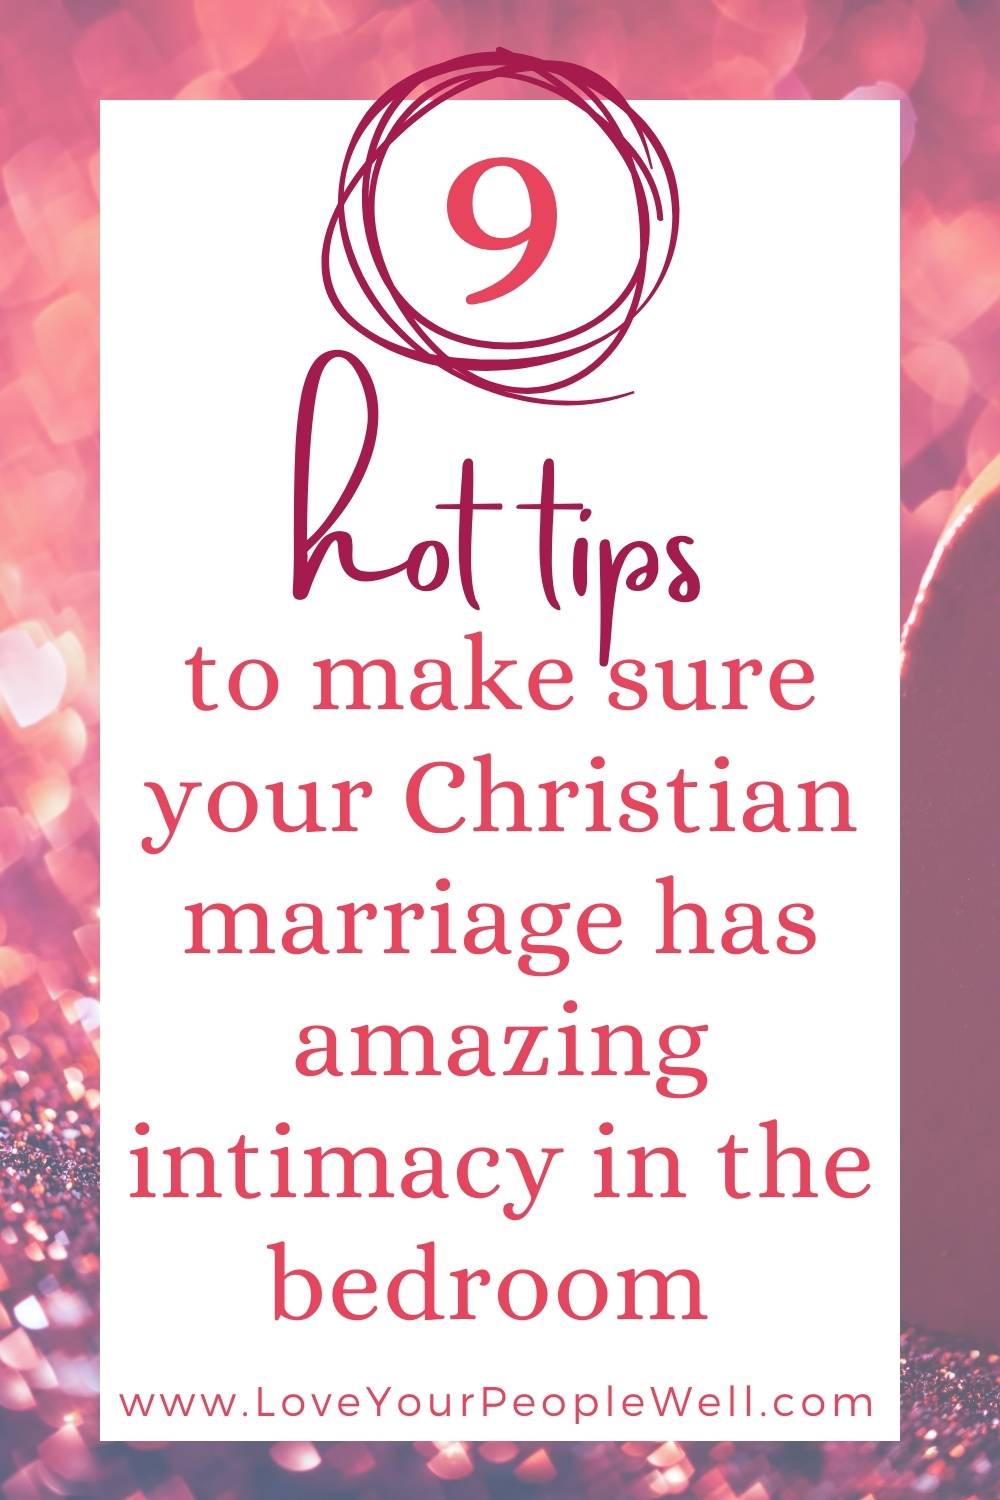 9 hot tips for intimacy in your Christian marriage